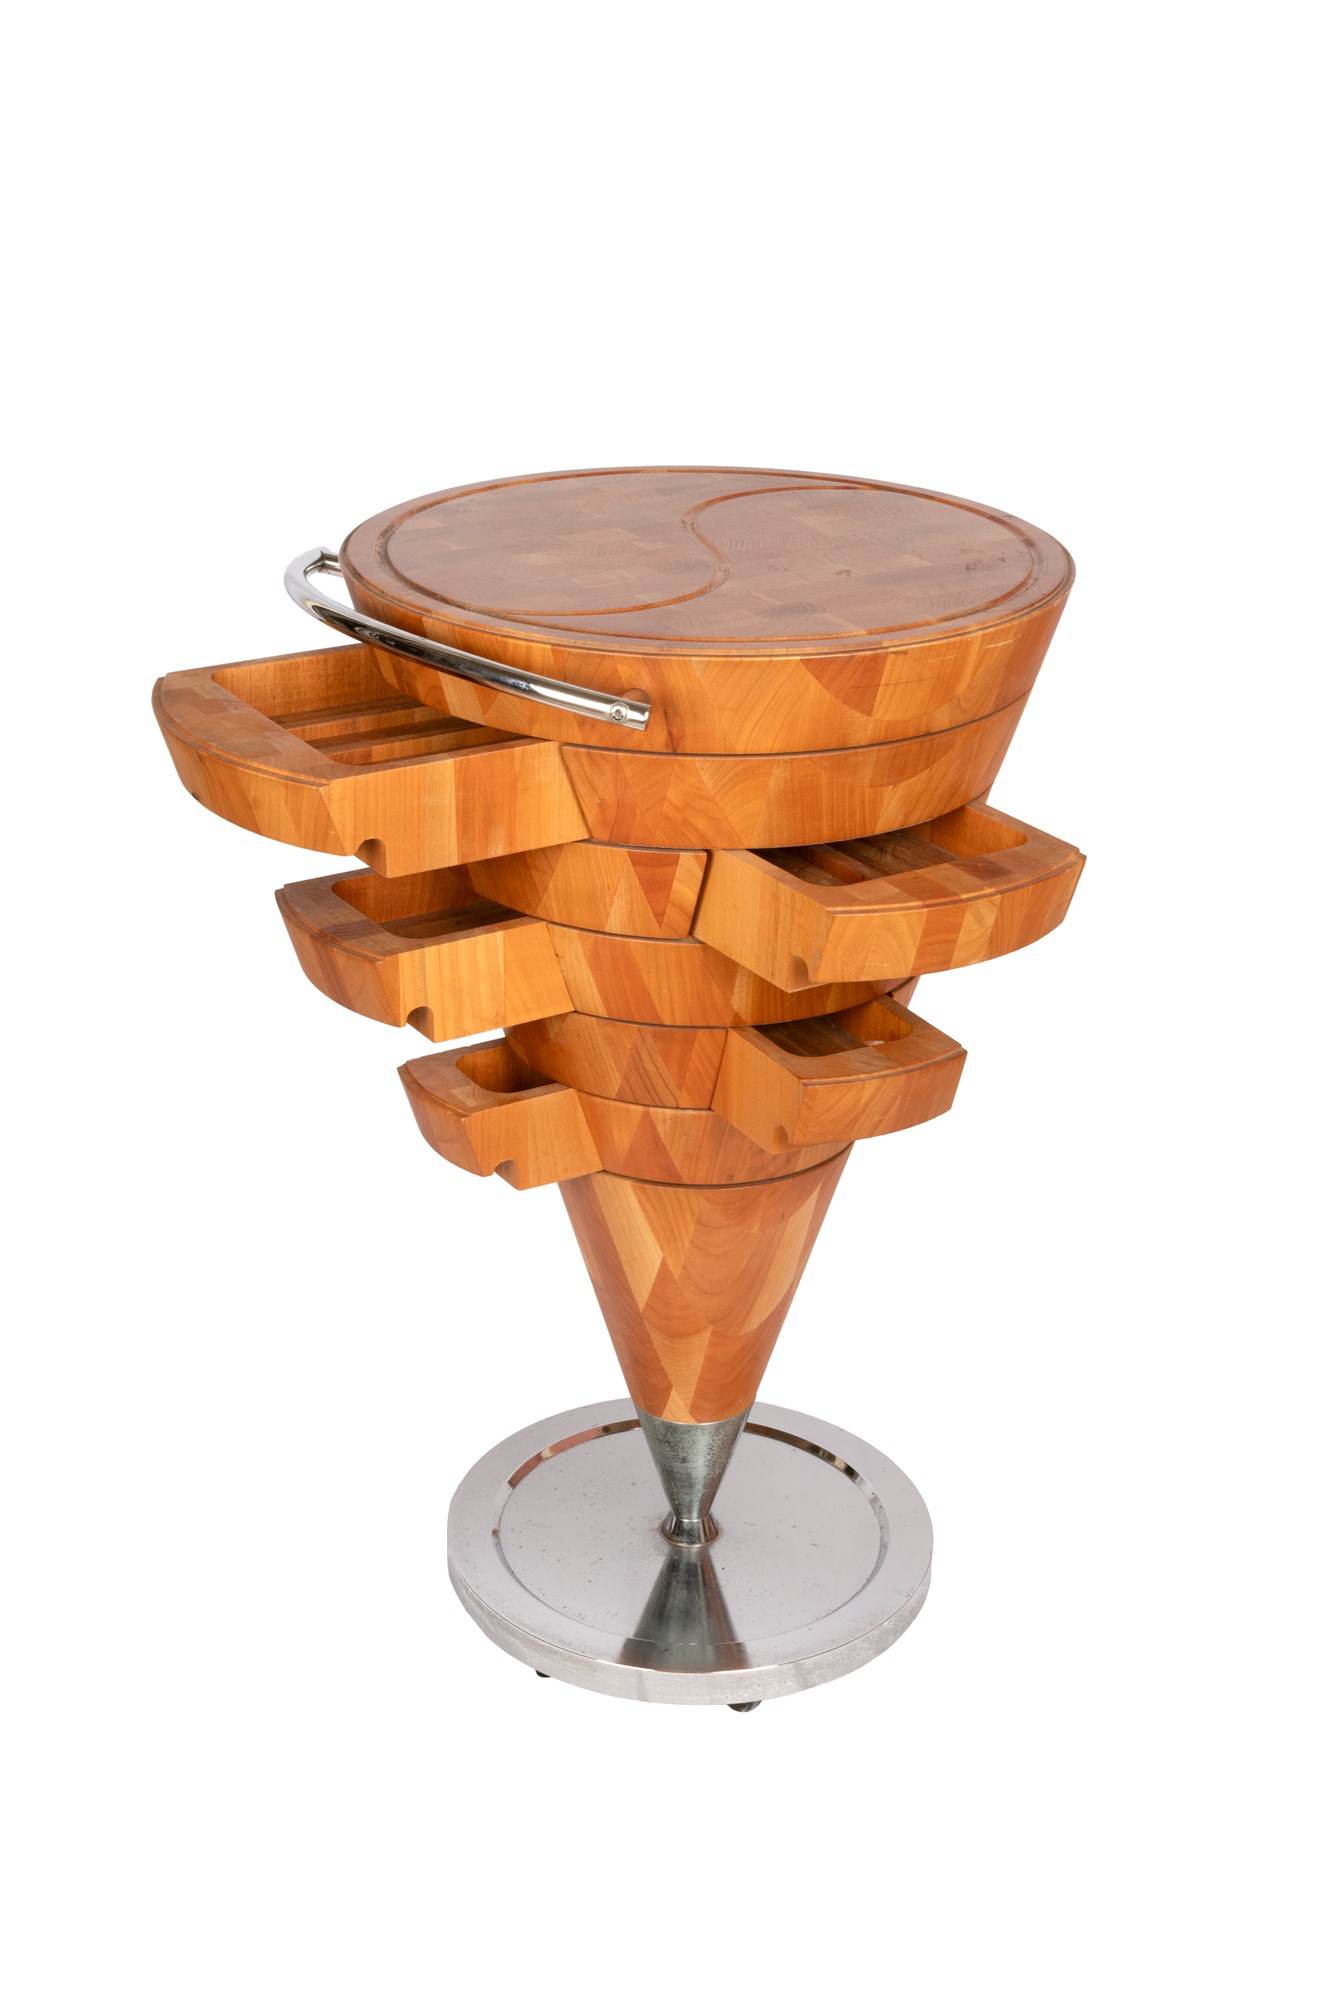 Wooden table with retractable drawers and steel base - Image 12 of 23